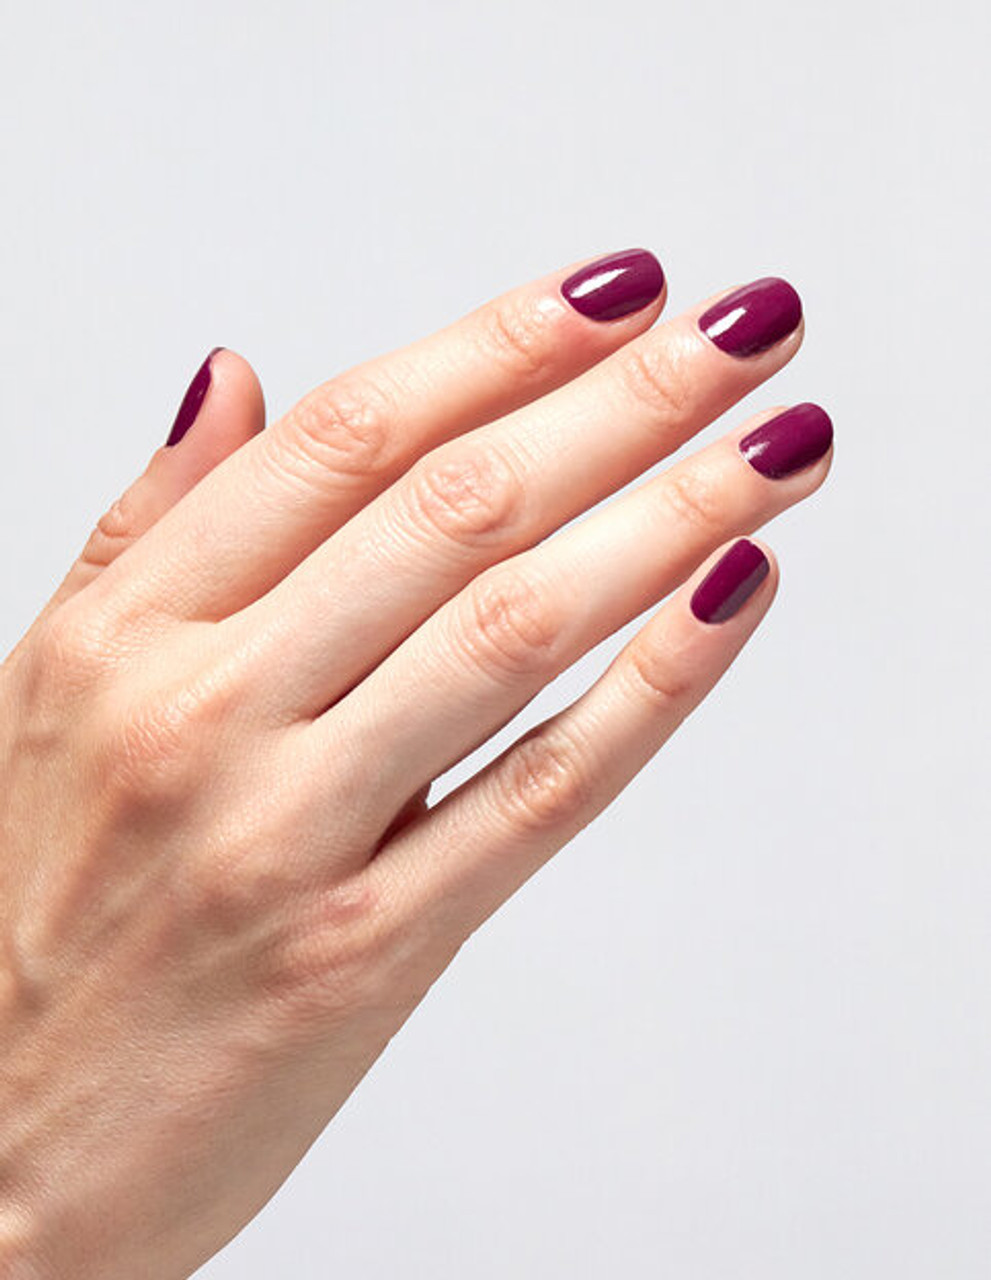 DND Spiced Berry | Berry nails, Nail colors, Dnd gel polish